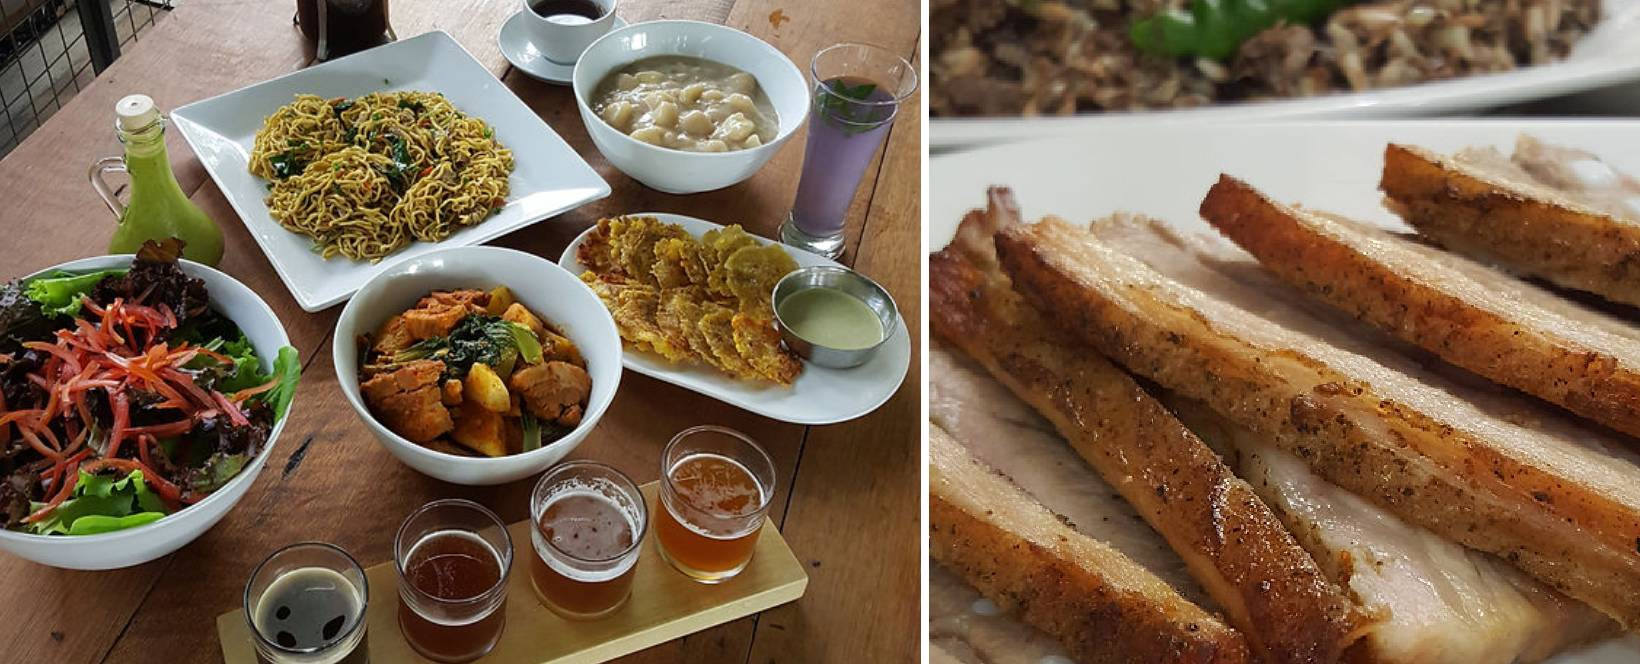 The Weekend Farmer in Cavite - farm-to-table meals